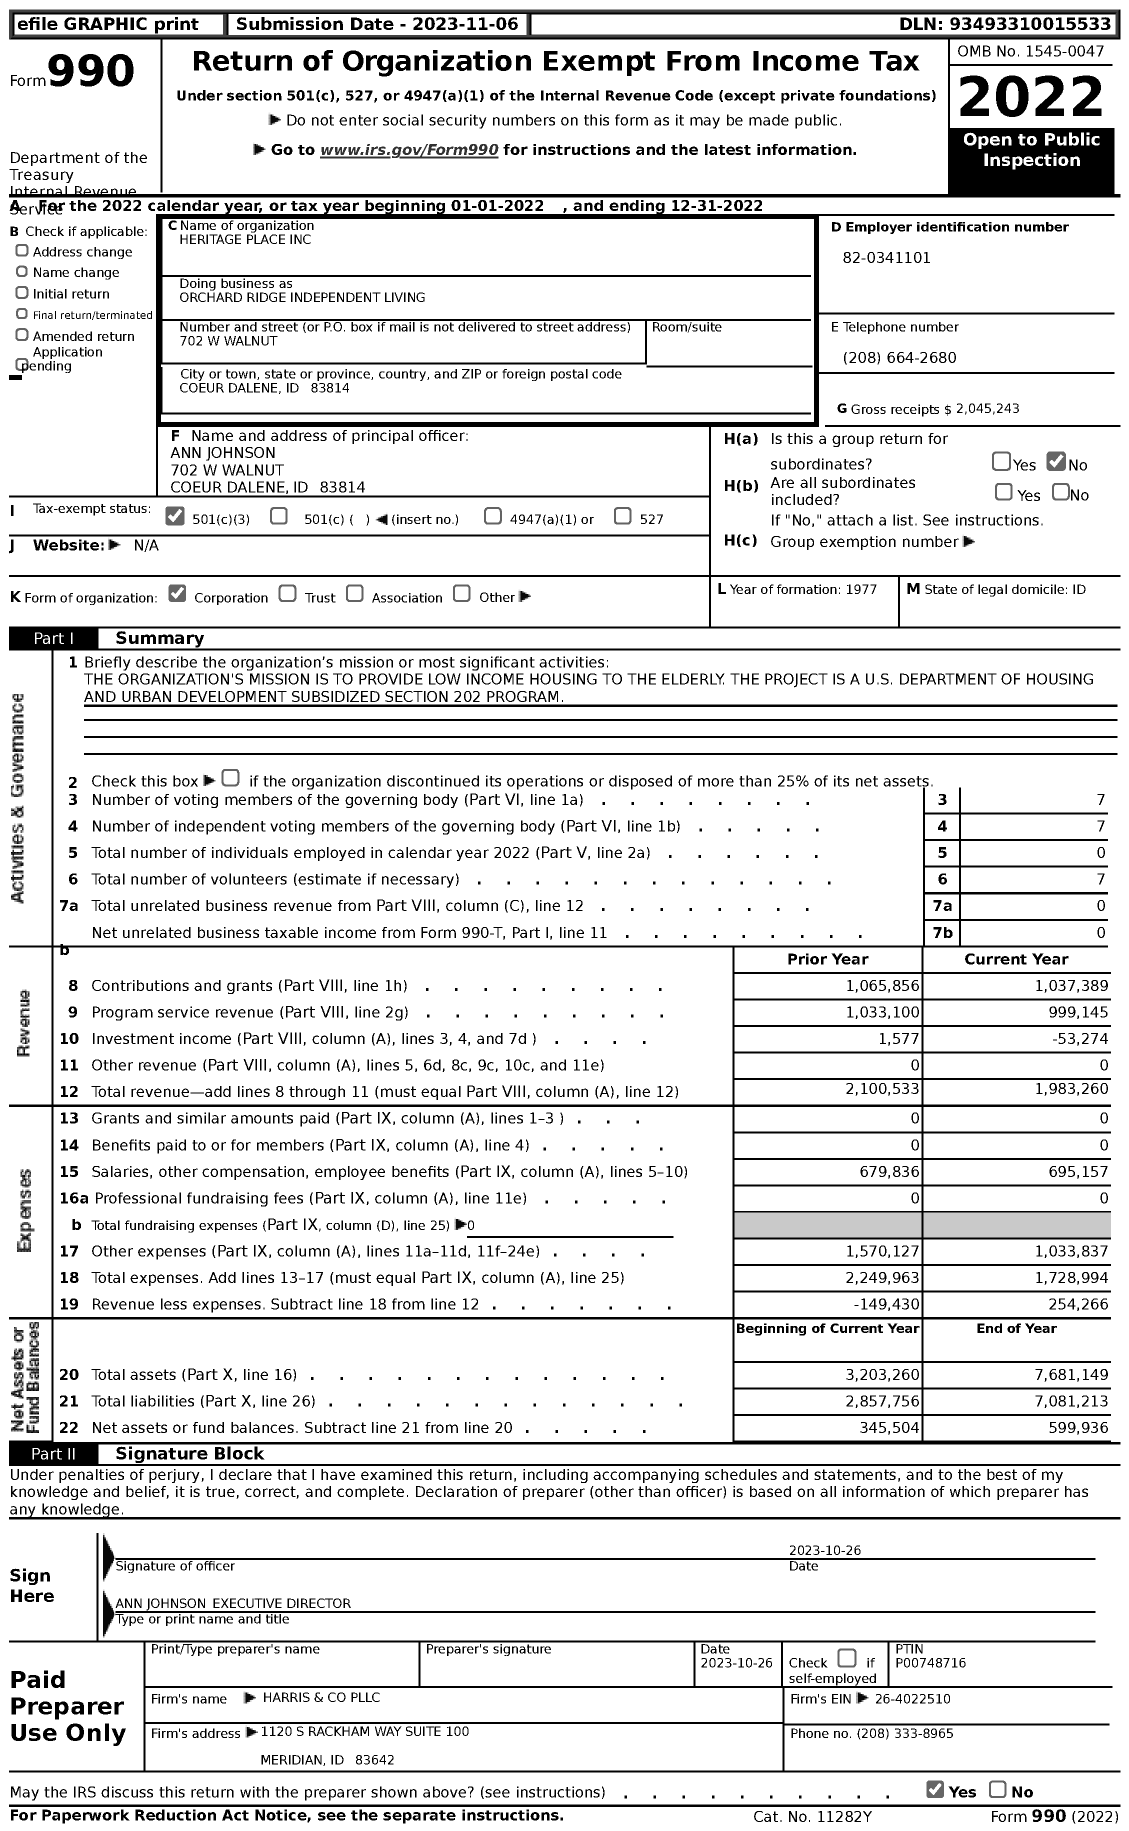 Image of first page of 2022 Form 990 for Orchard Ridge Independent Living